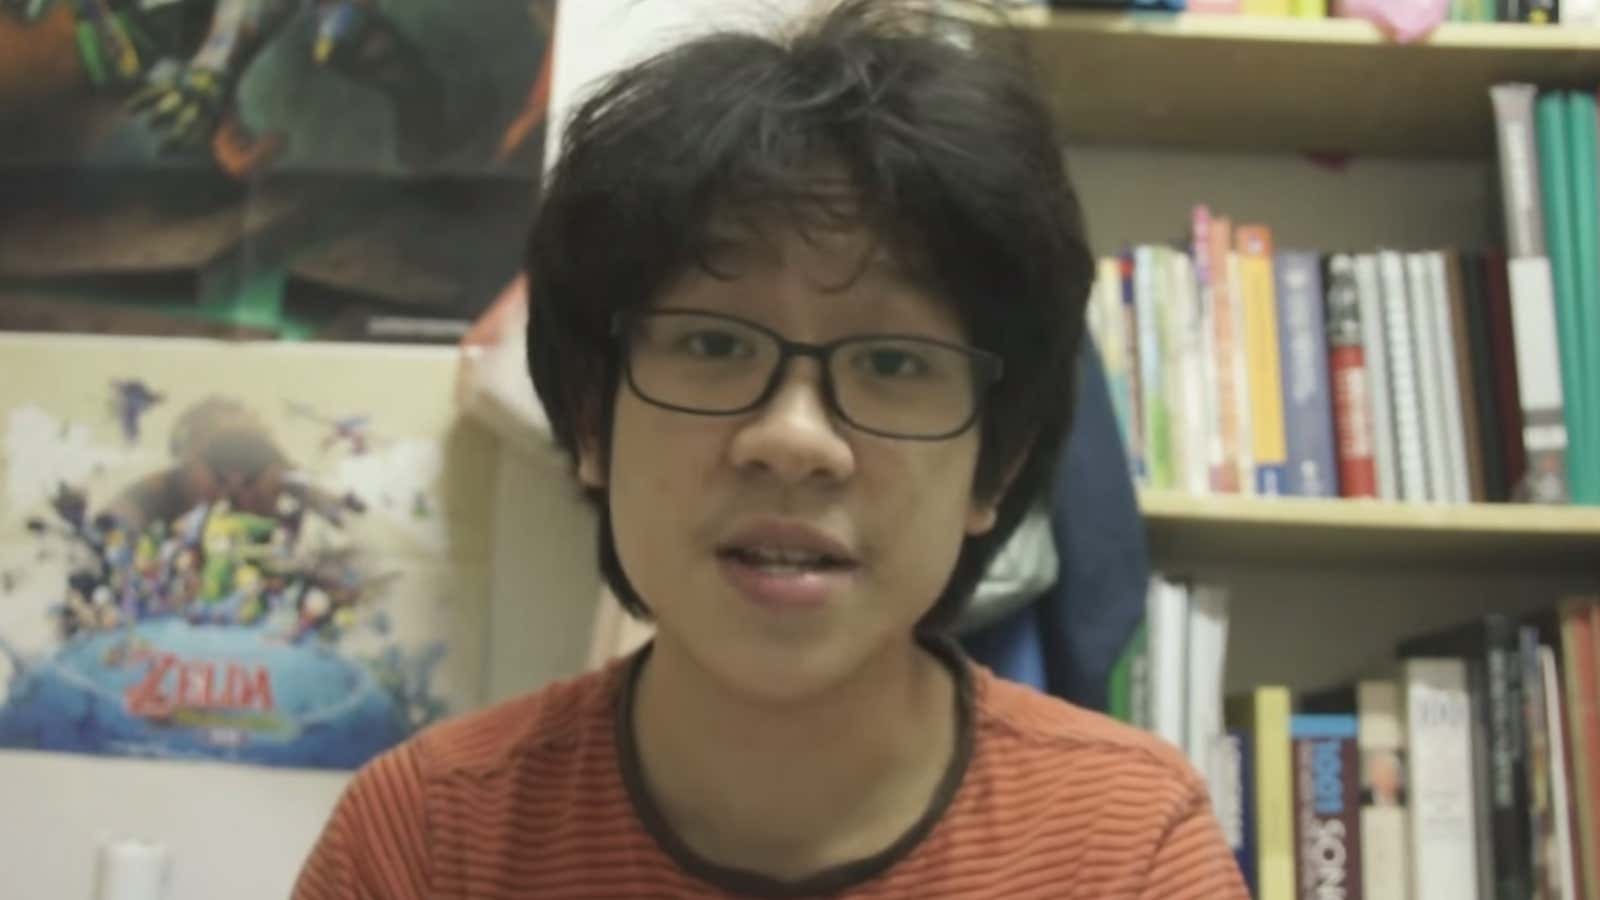 Amos Yee just proved once again the limits of Singapore’s speech freedoms.